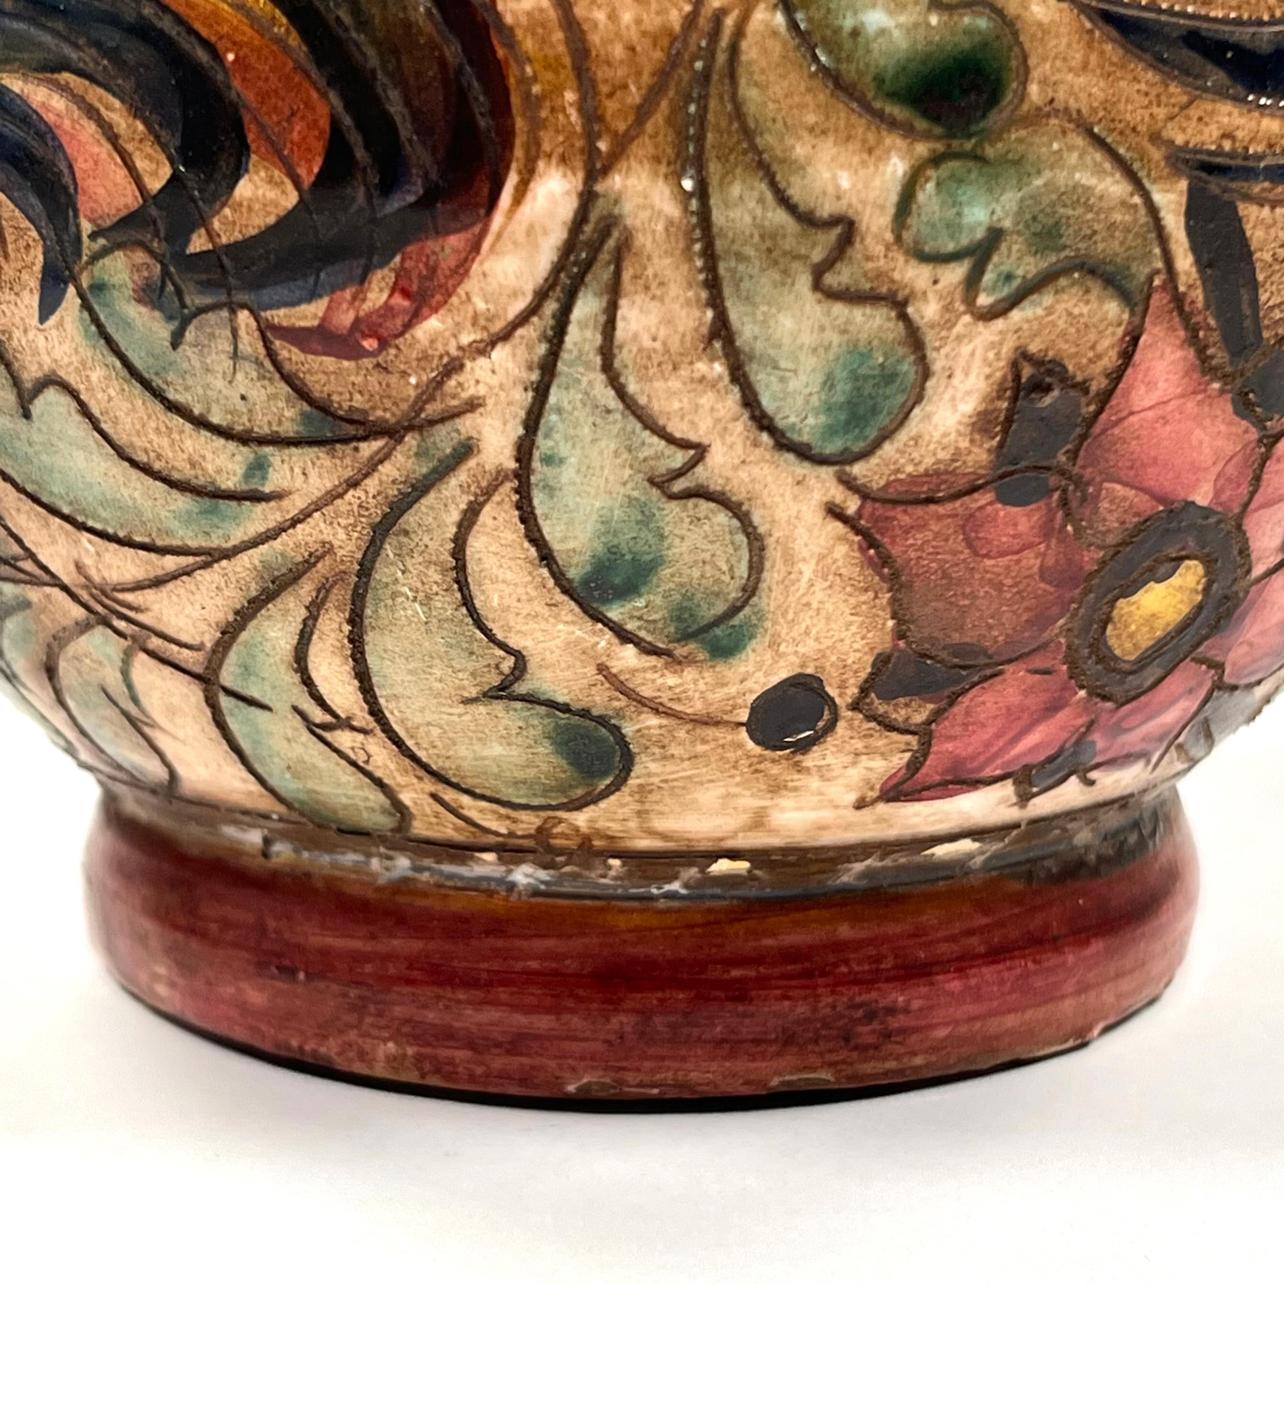  Italian Hand Painted Pottery Vase with Flowers and Birds Circa 19th C. In Good Condition For Sale In Los Angeles, CA